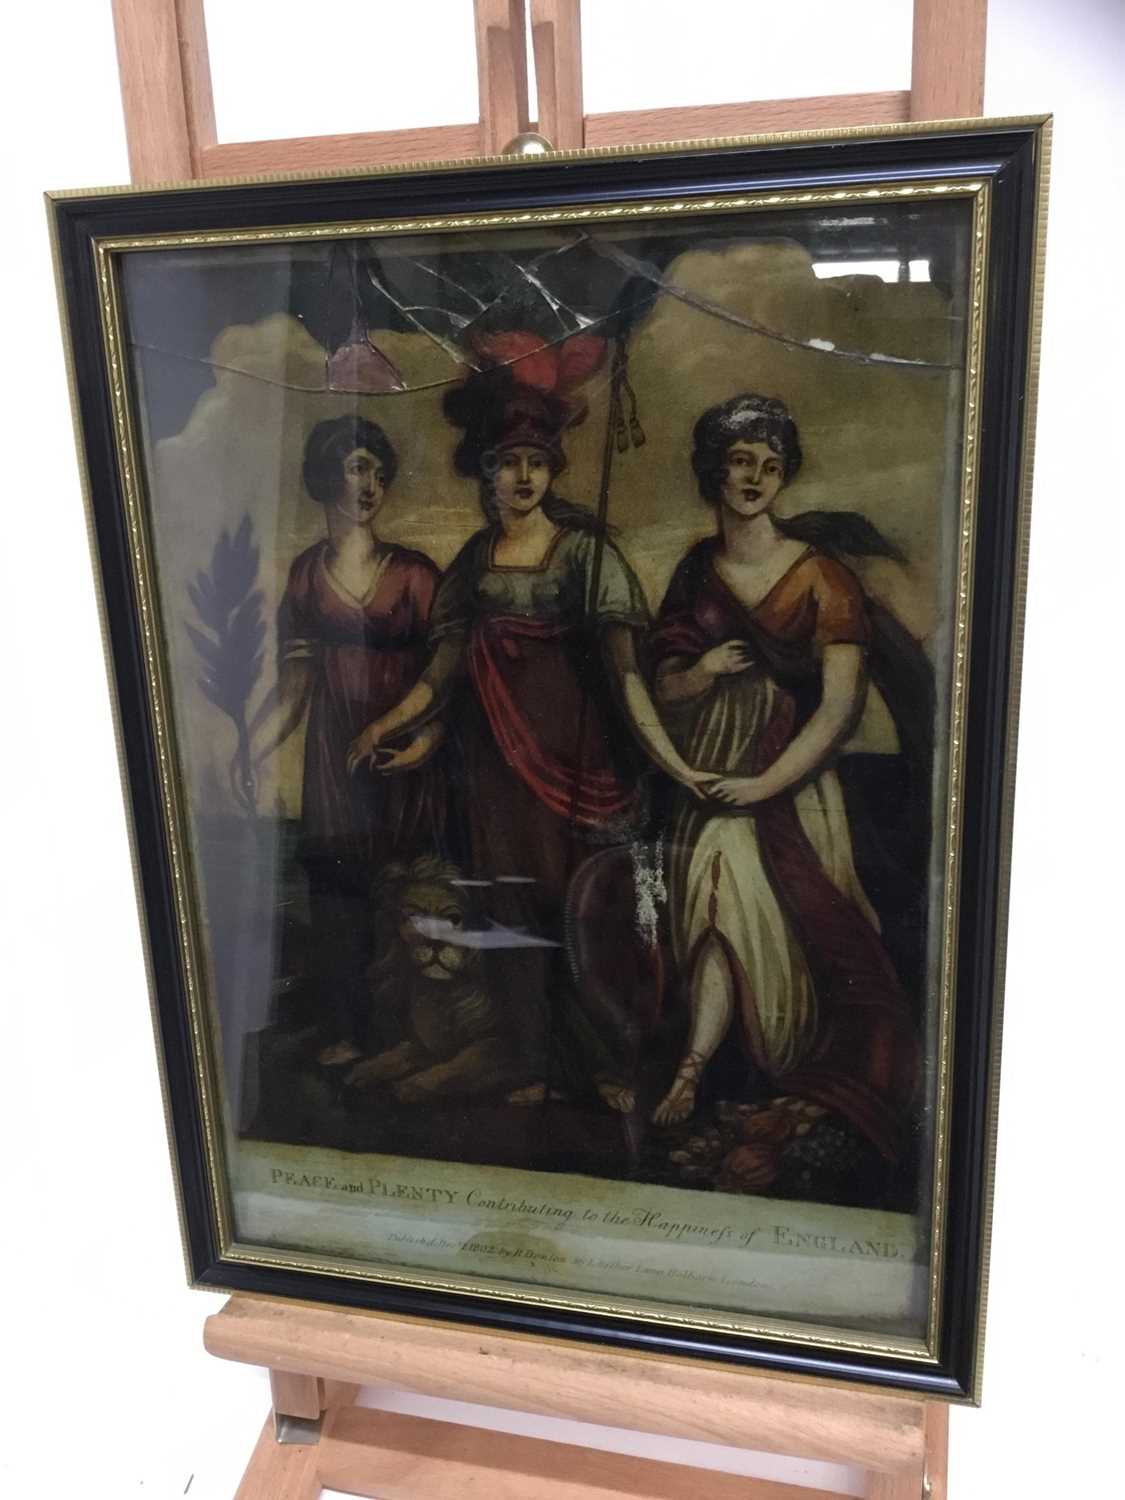 Regency style reverse print on glass, another - Image 4 of 6